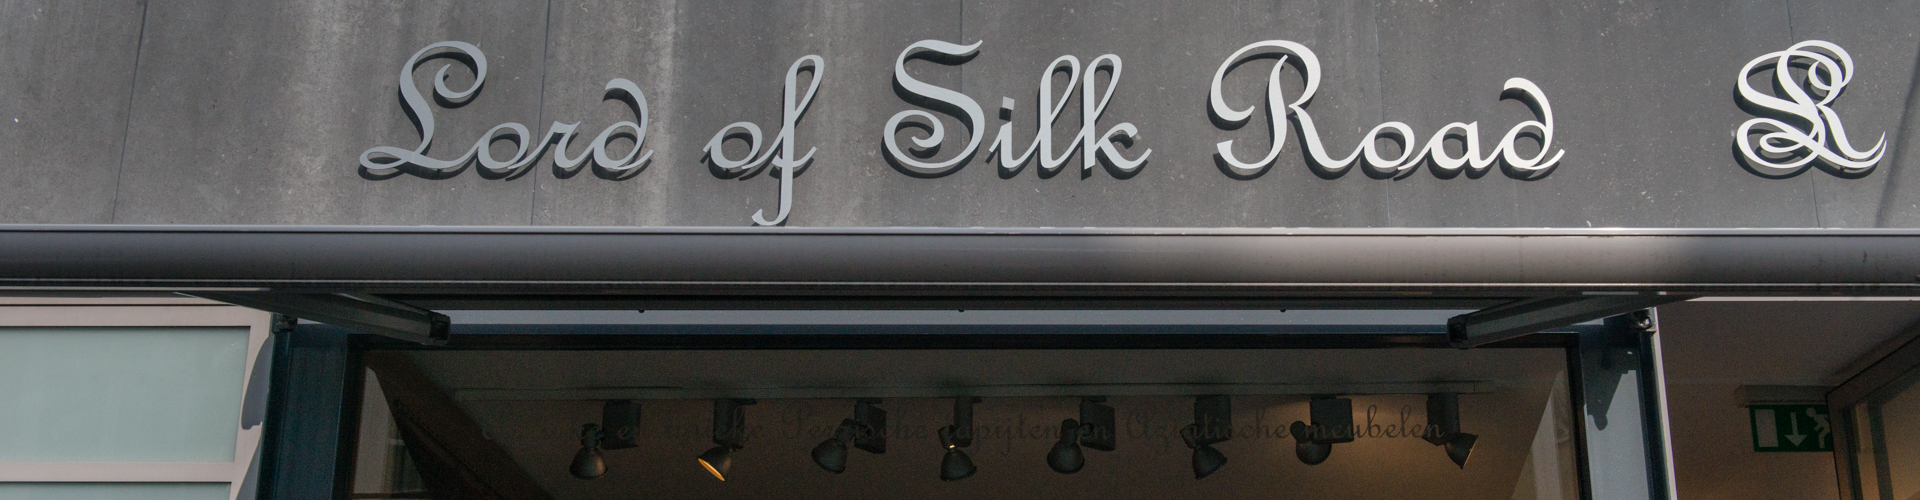 lord of silk road shop